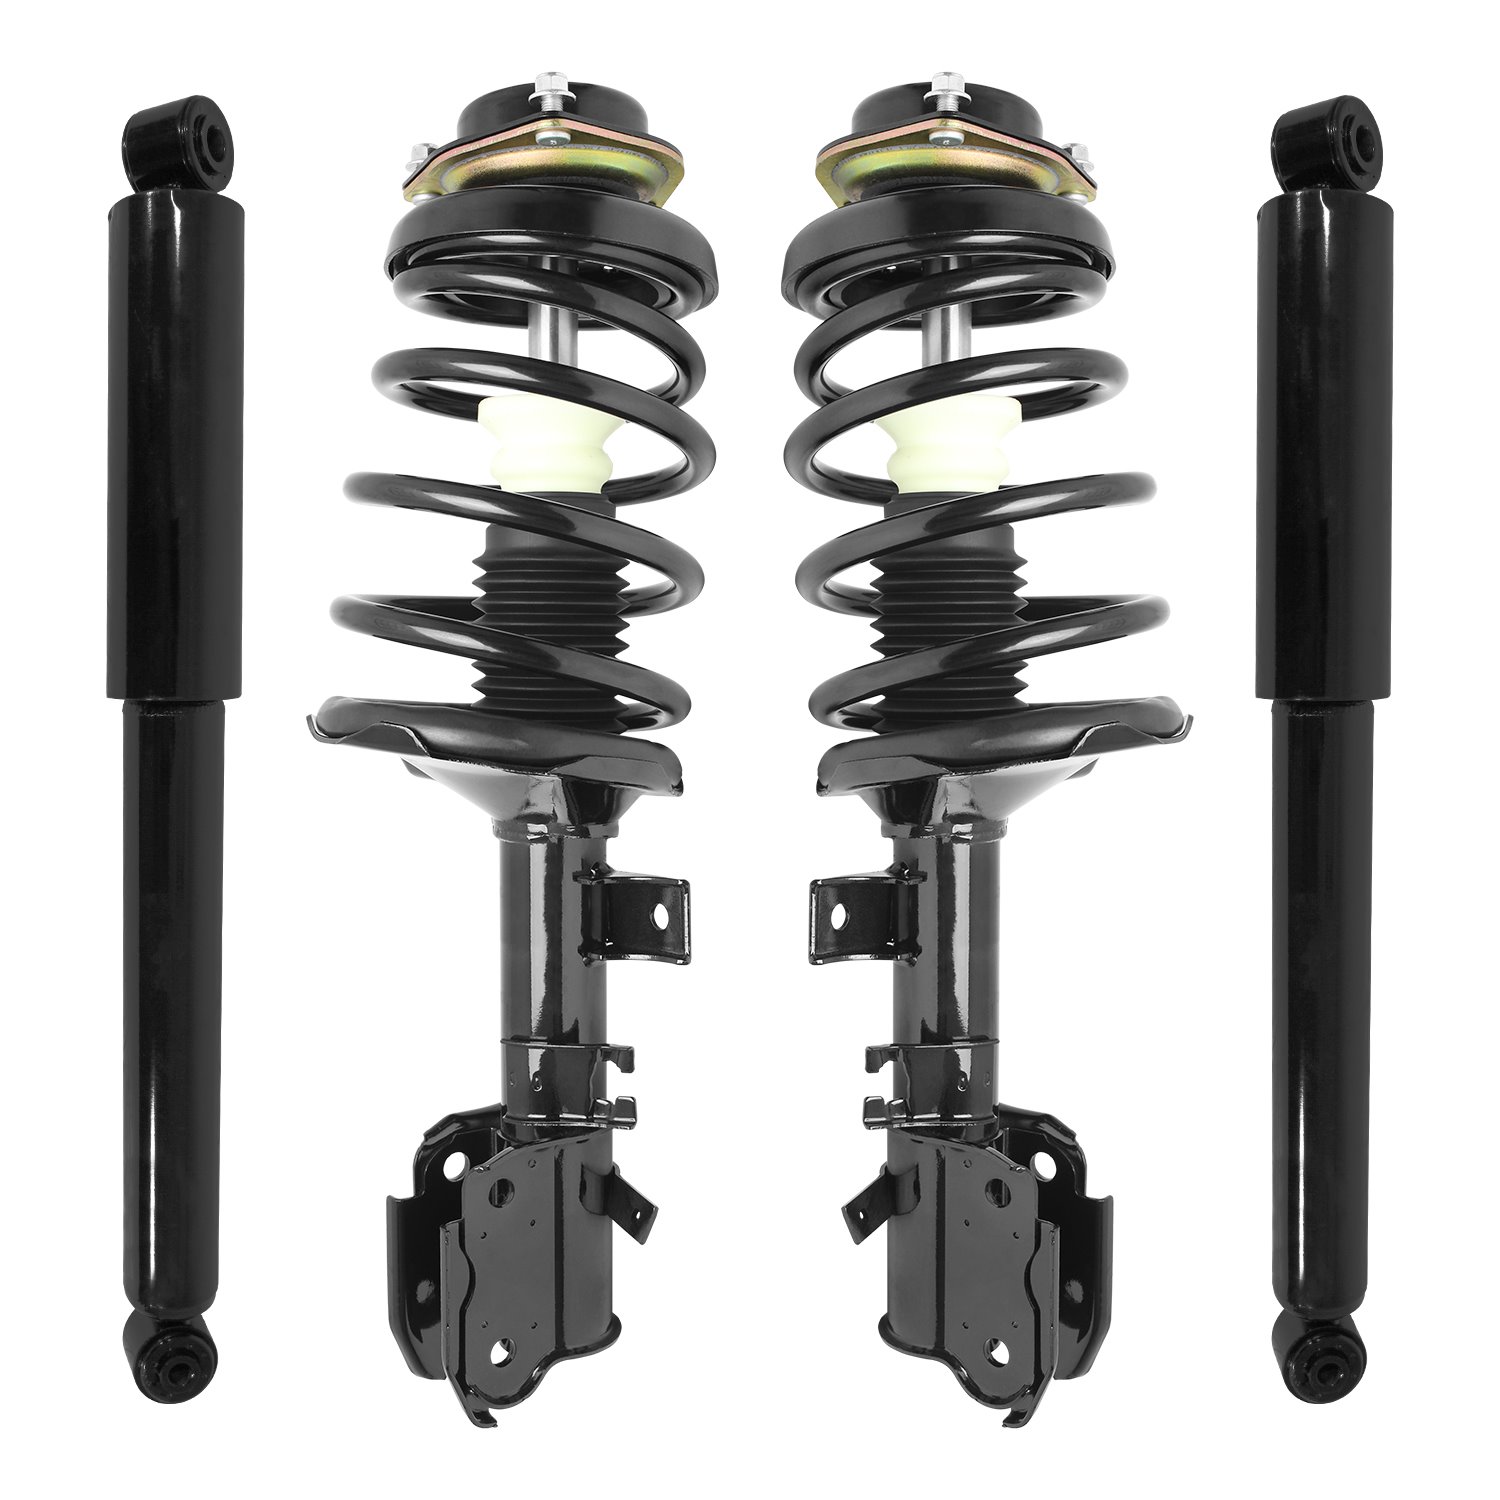 4-11313-255420-001 Front & Rear Suspension Strut & Coil Spring Assembly Fits Select Nissan Pathfinder, Infiniti QX4